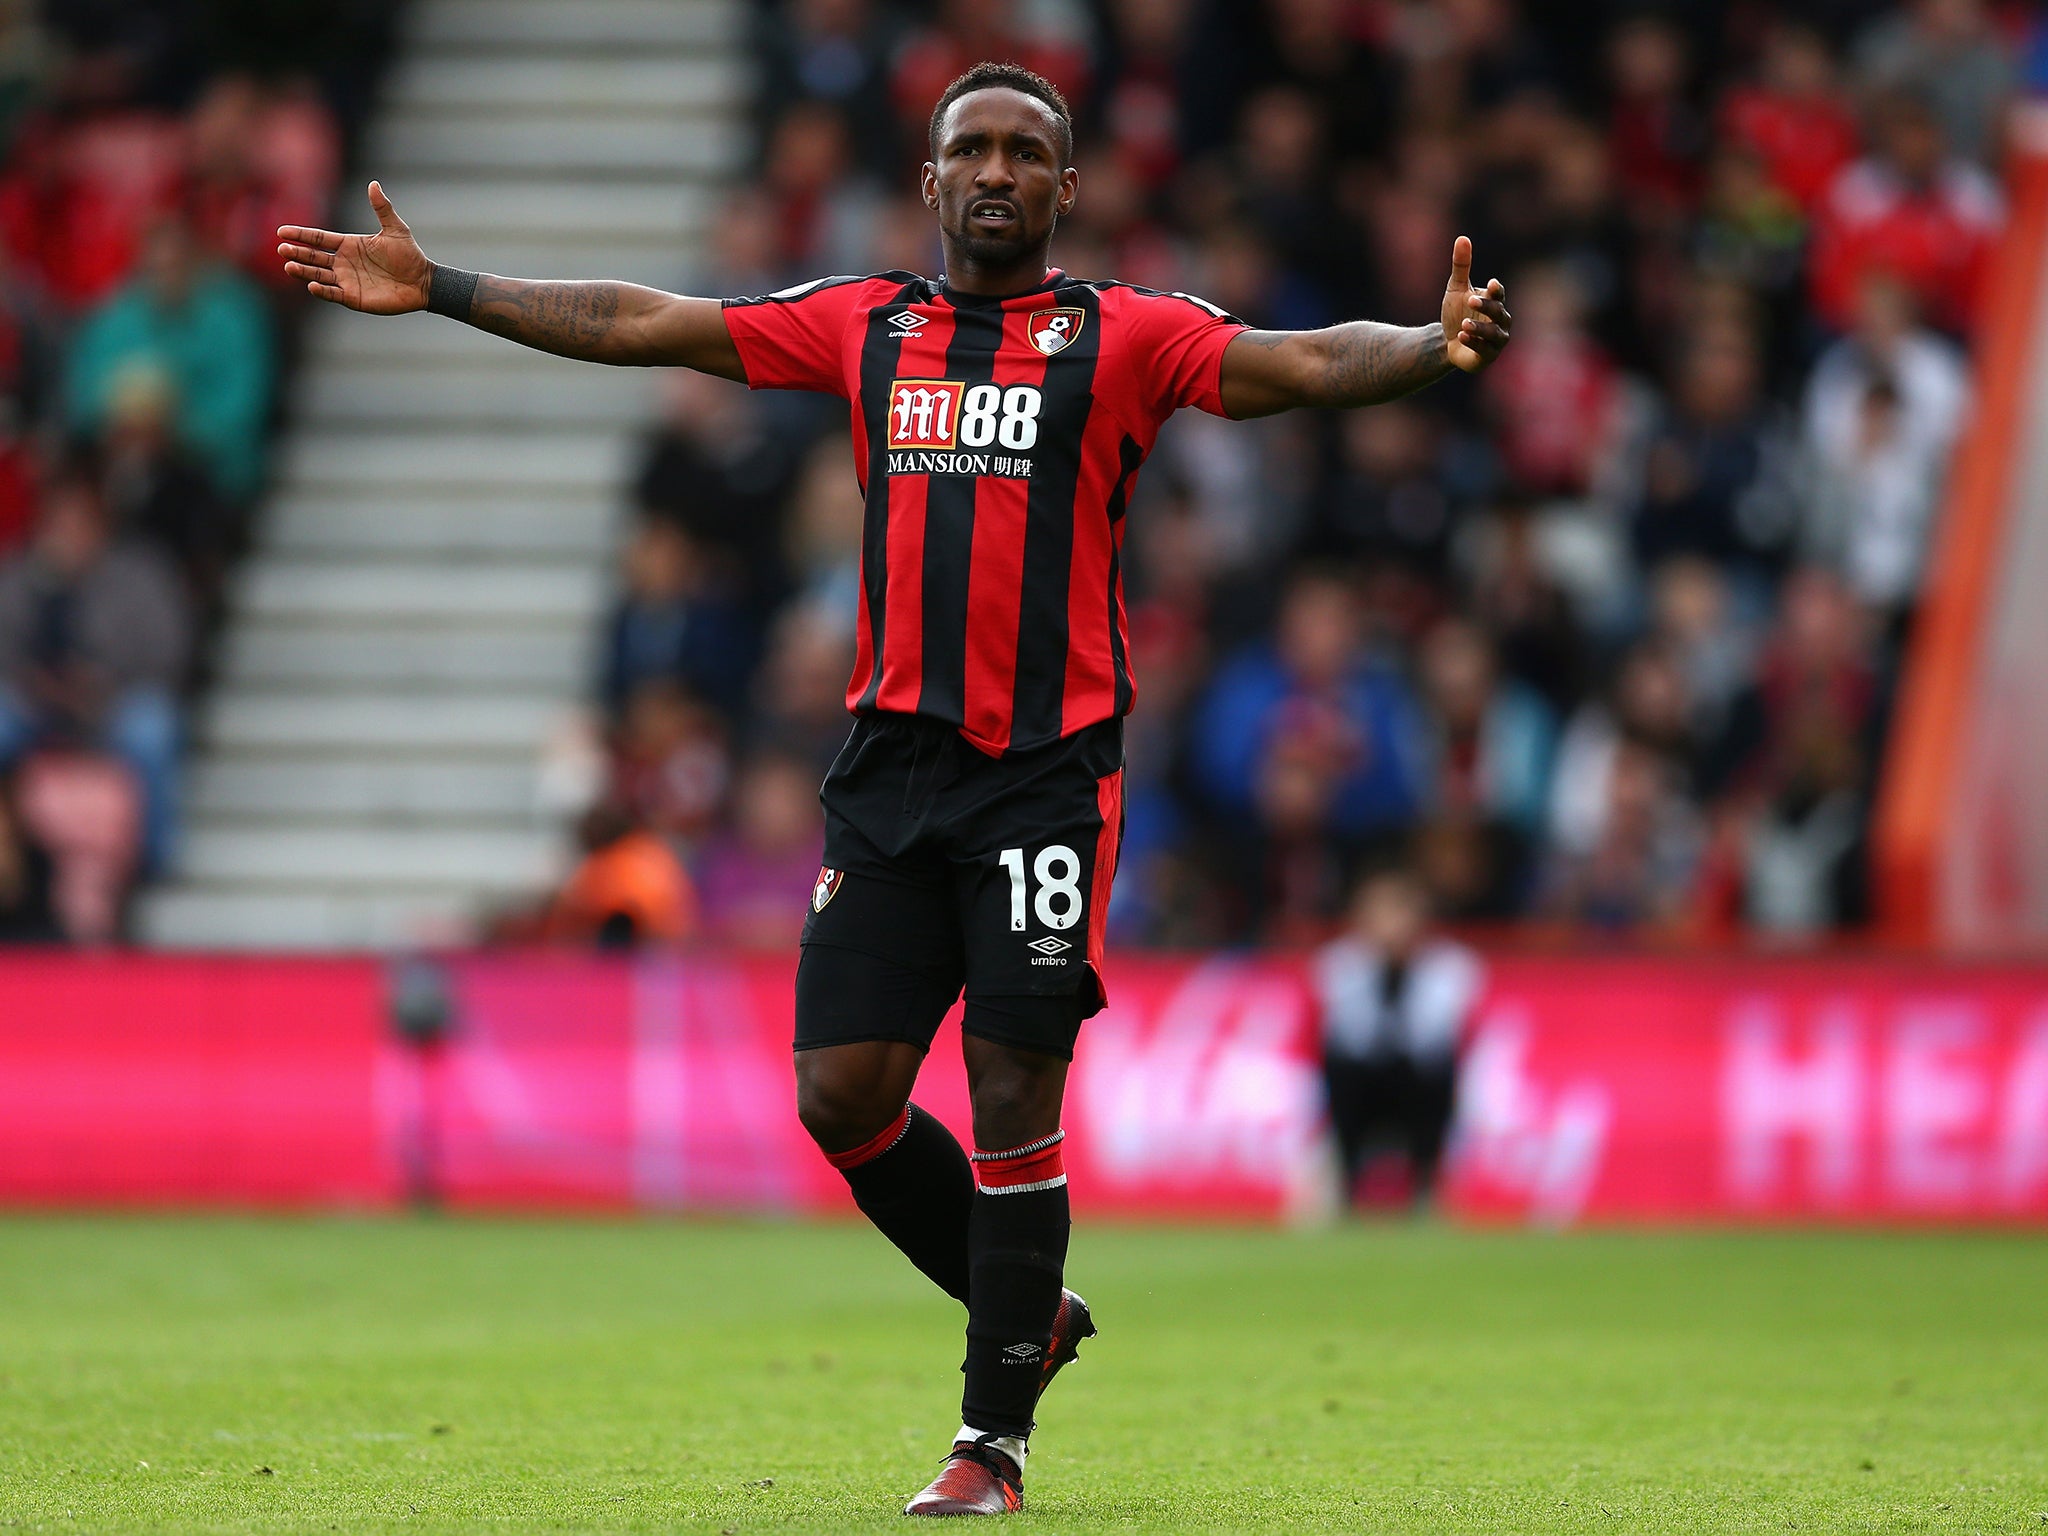 Bournemouth were left angered by the failure to award a penalty against Leicester City